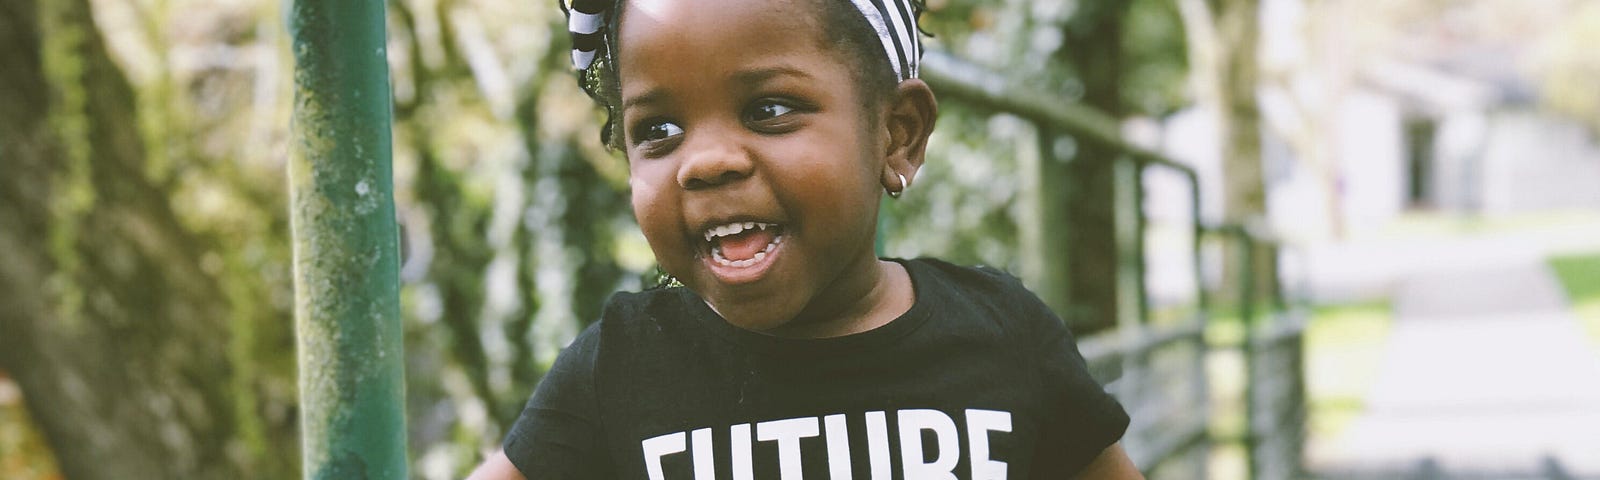 Excited adorable kid, with brown skin and black braids in a striped headband, in a “Future Leader” shirt, on a little bridge